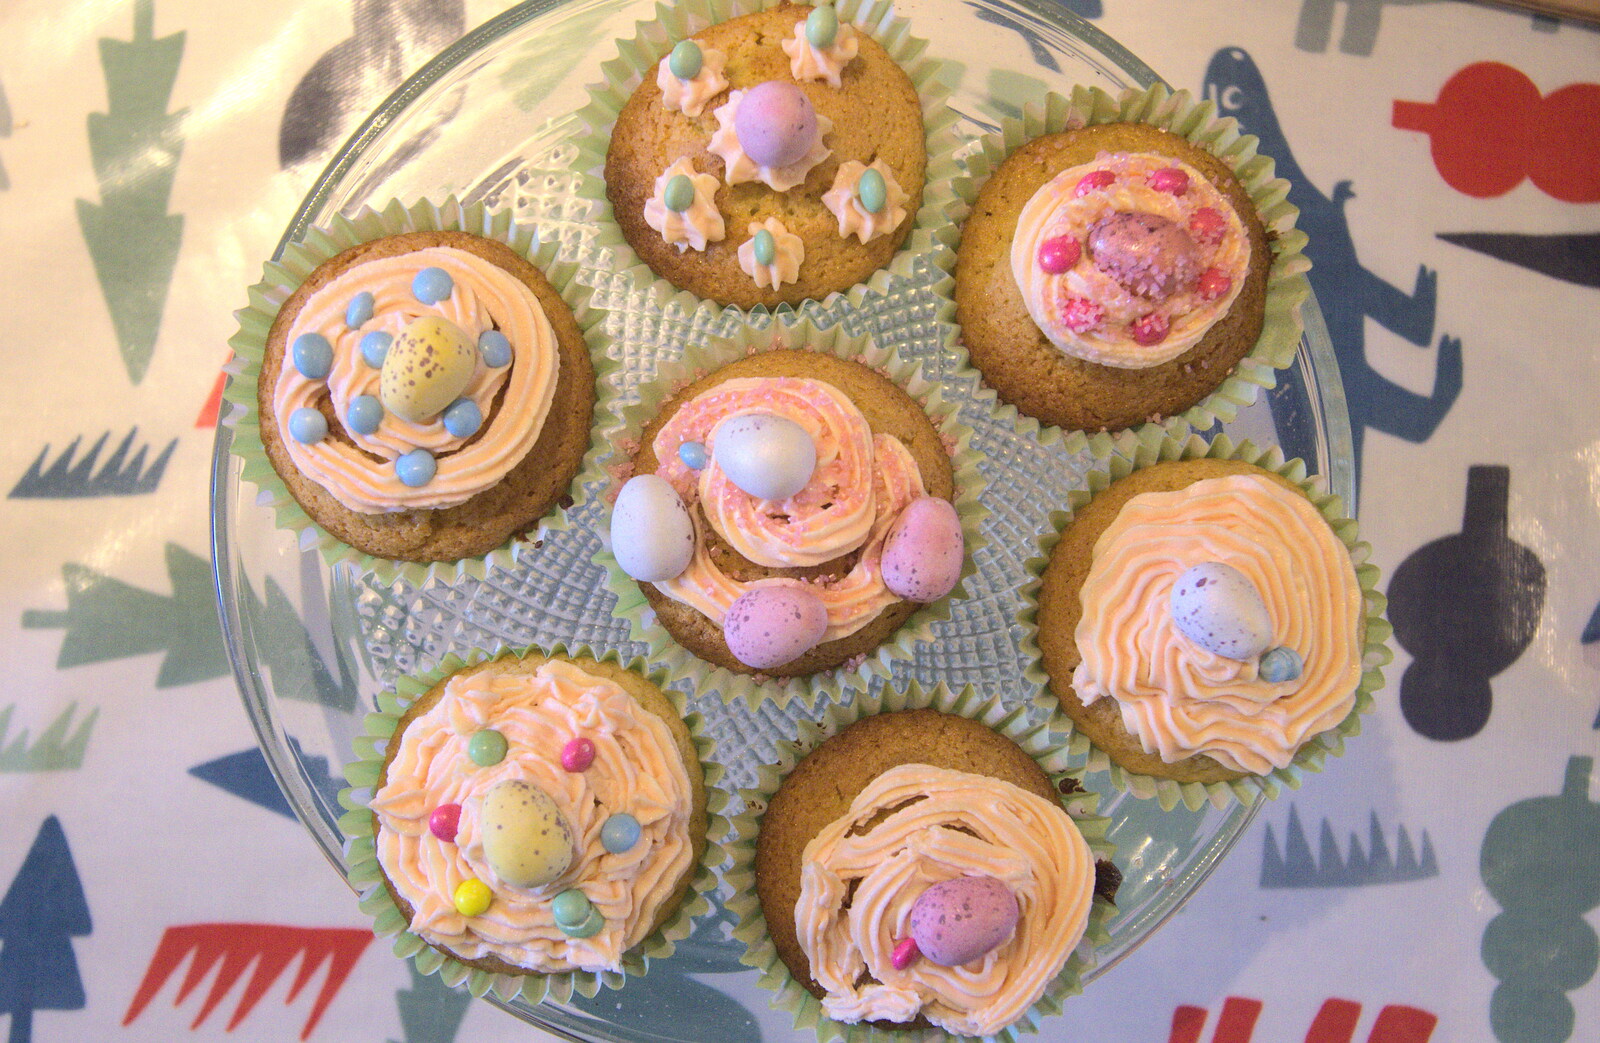 A nice collection of cup cakes from An Easter Visit from Da Gorls, Brome, Suffolk - 2nd April 2013